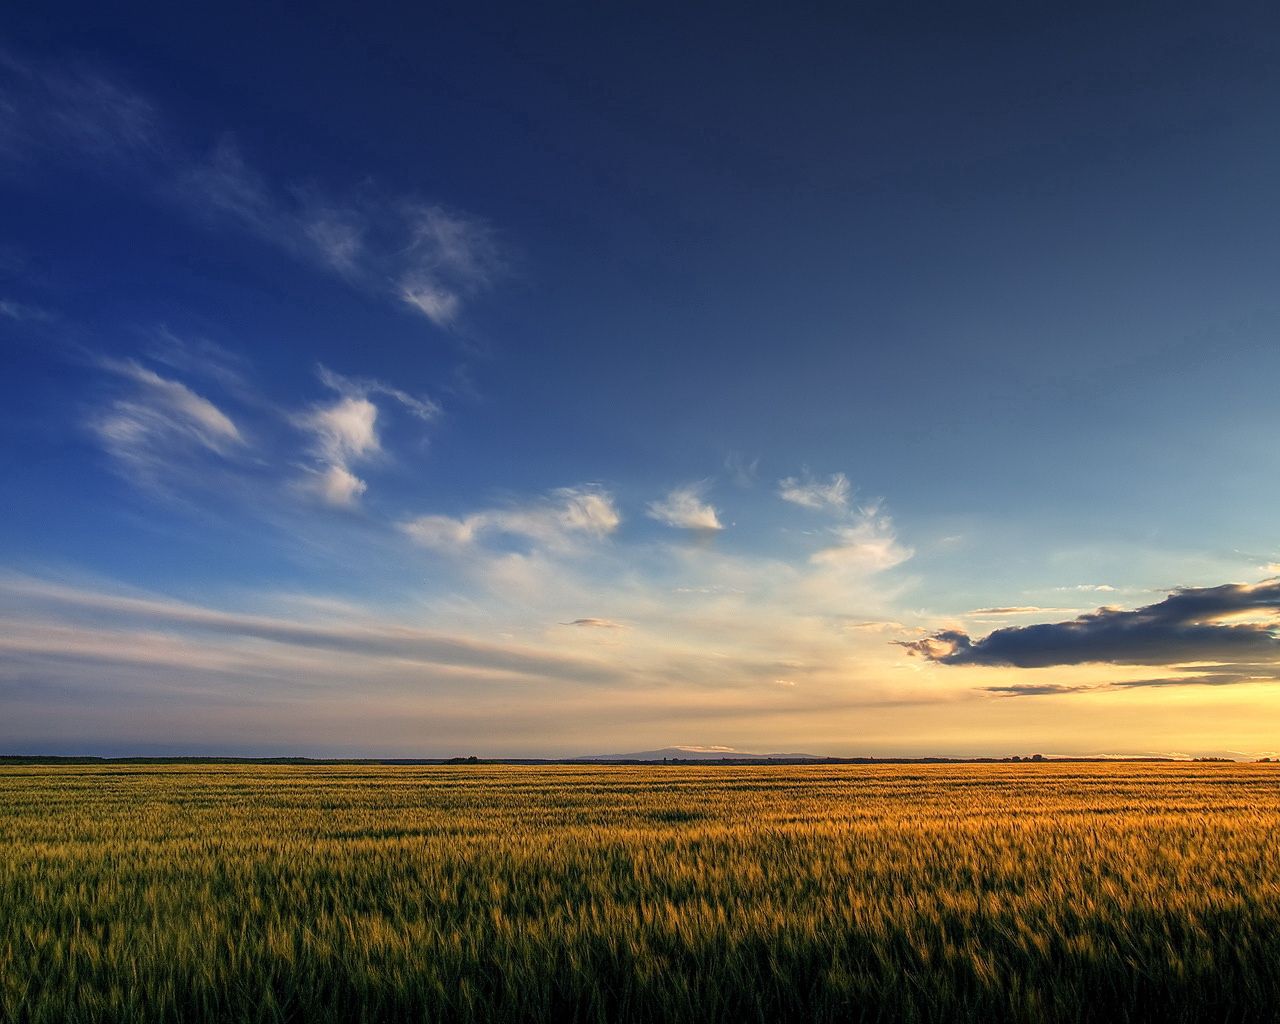 open spaces, expanse, sunset, nature, sky, clouds, field